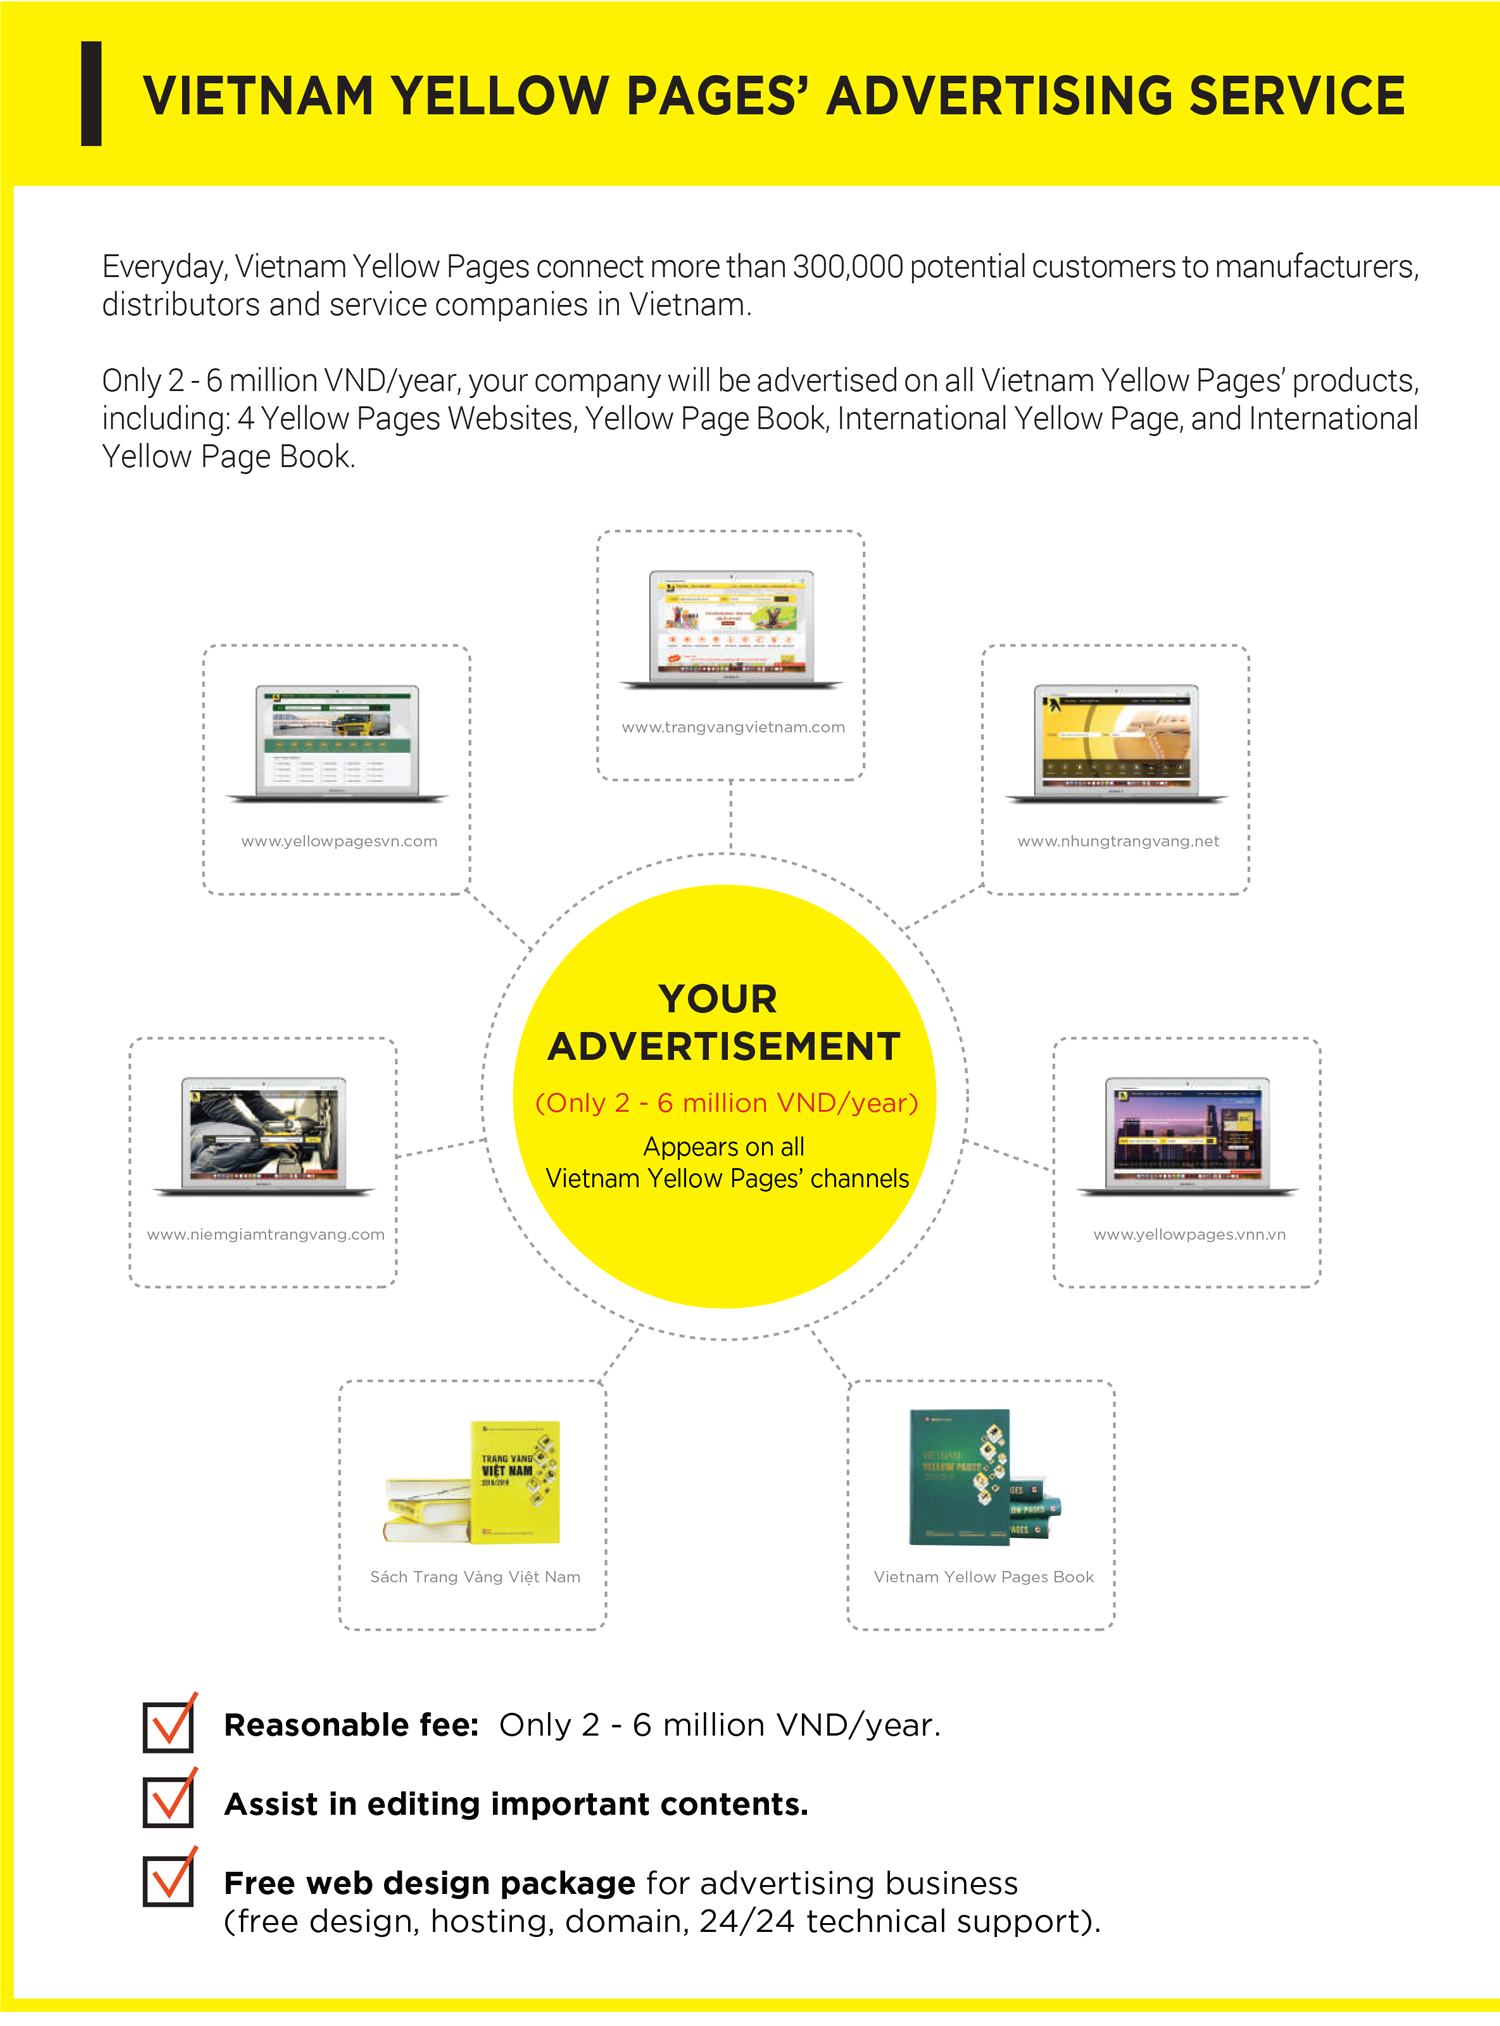 Vietnam Yellow Pages Advertising Services